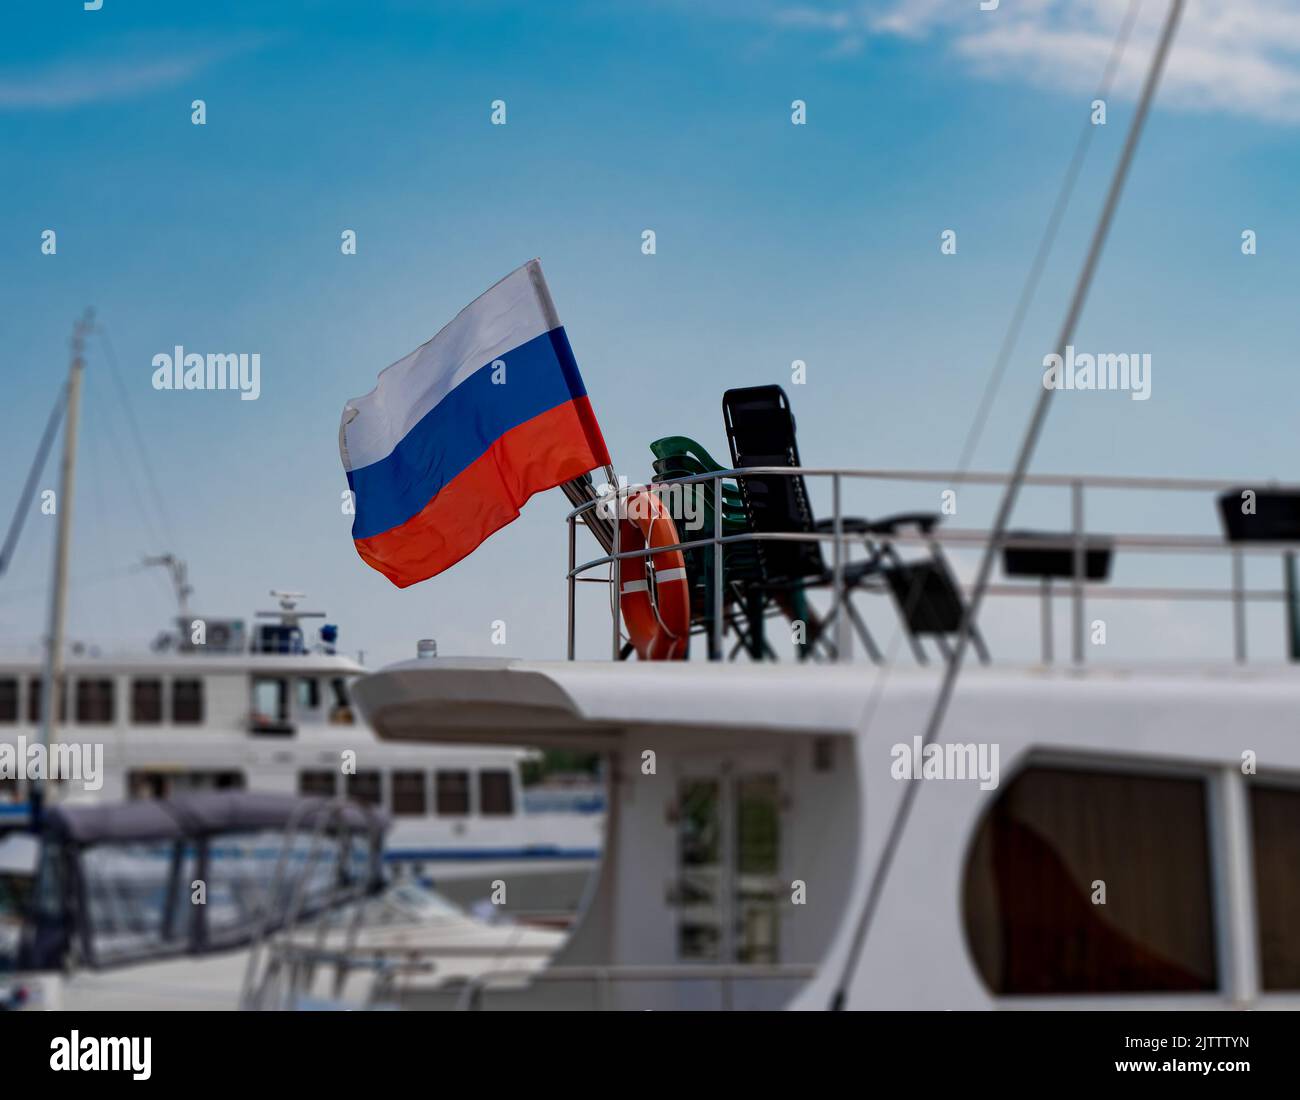 The Russian flag on the stern of the yacht. Large white yacht in the harbor Stock Photo